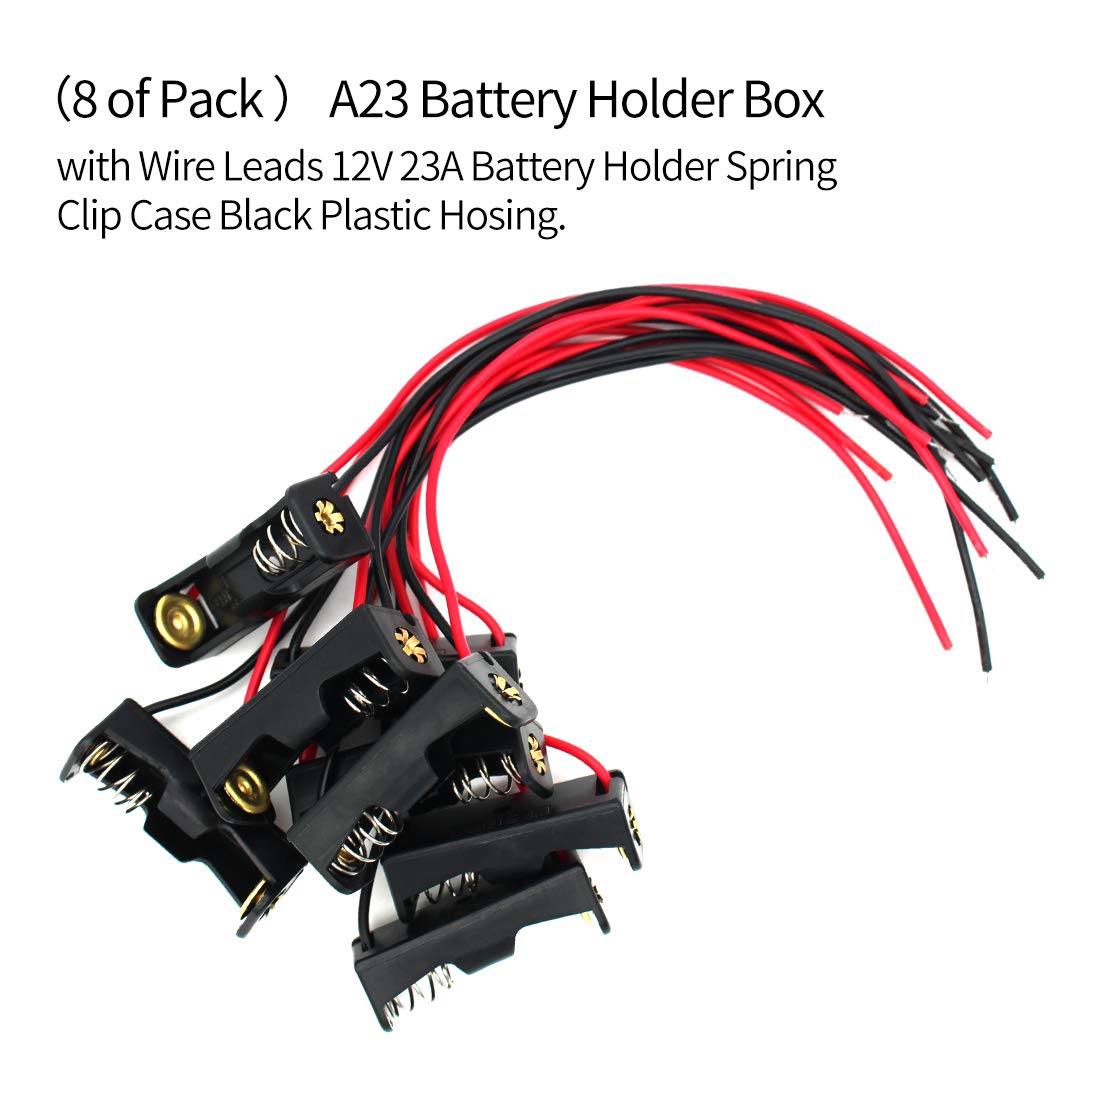 8 Pack A23 Battery Holder Box with Wire Leads 12V 23A Battery Holder Spring Clip Case Black Plastic Housing.